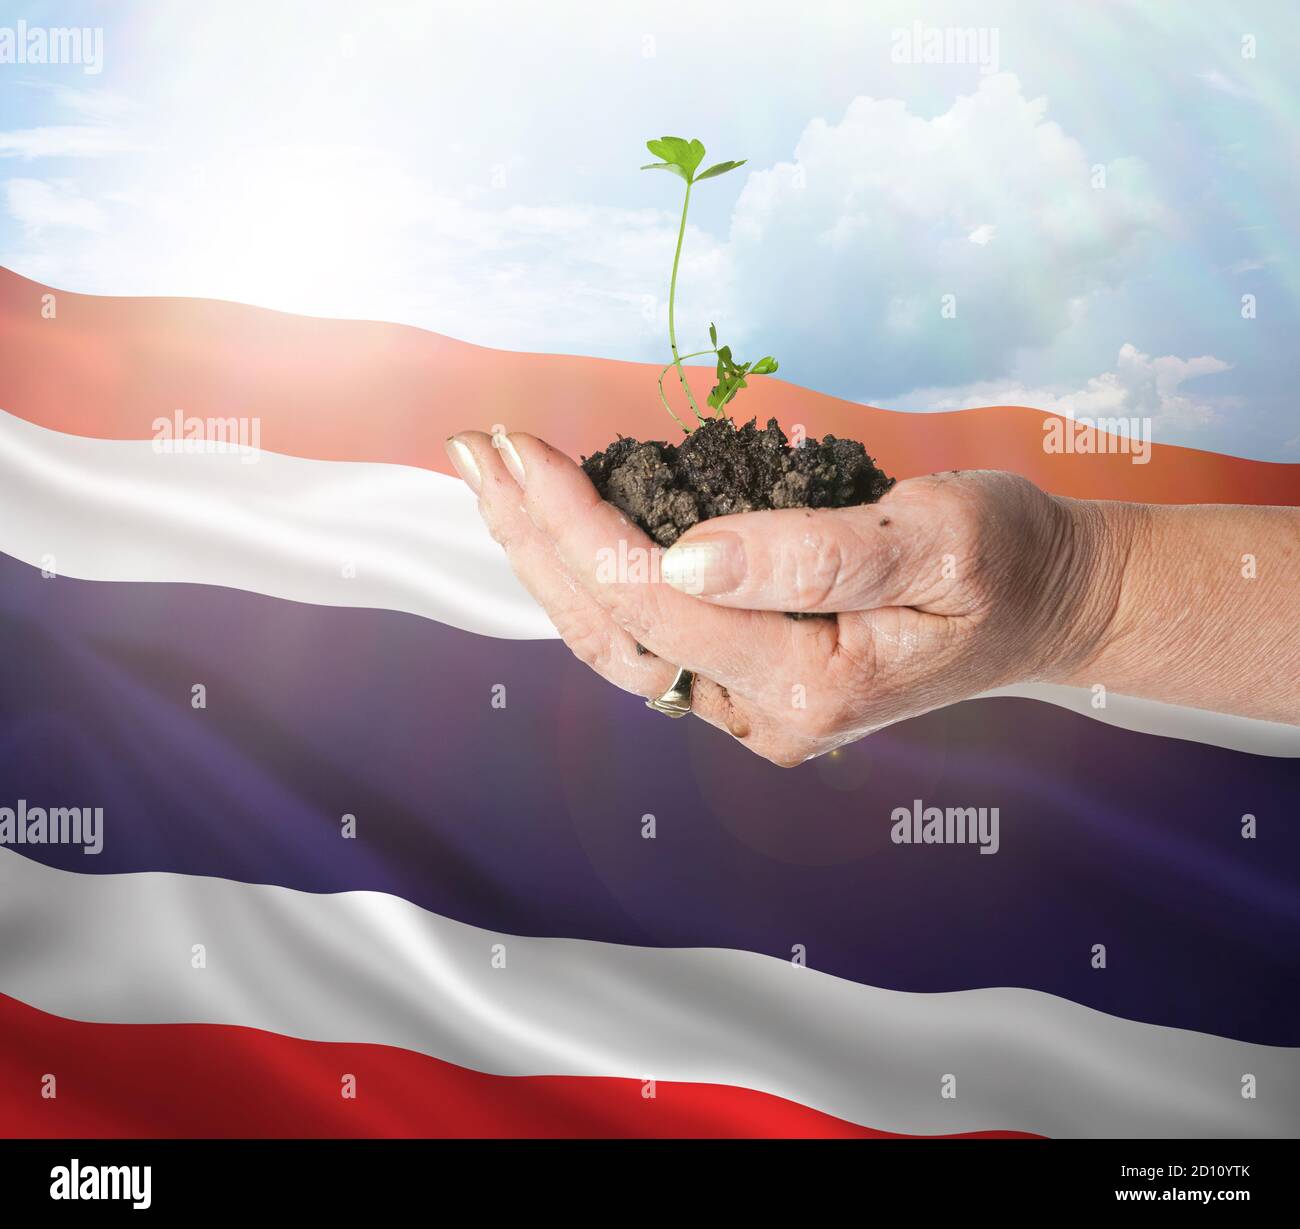 Thailand growth and new beginning. Green renewable energy and ecology concept. Hand holding young plant. Stock Photo